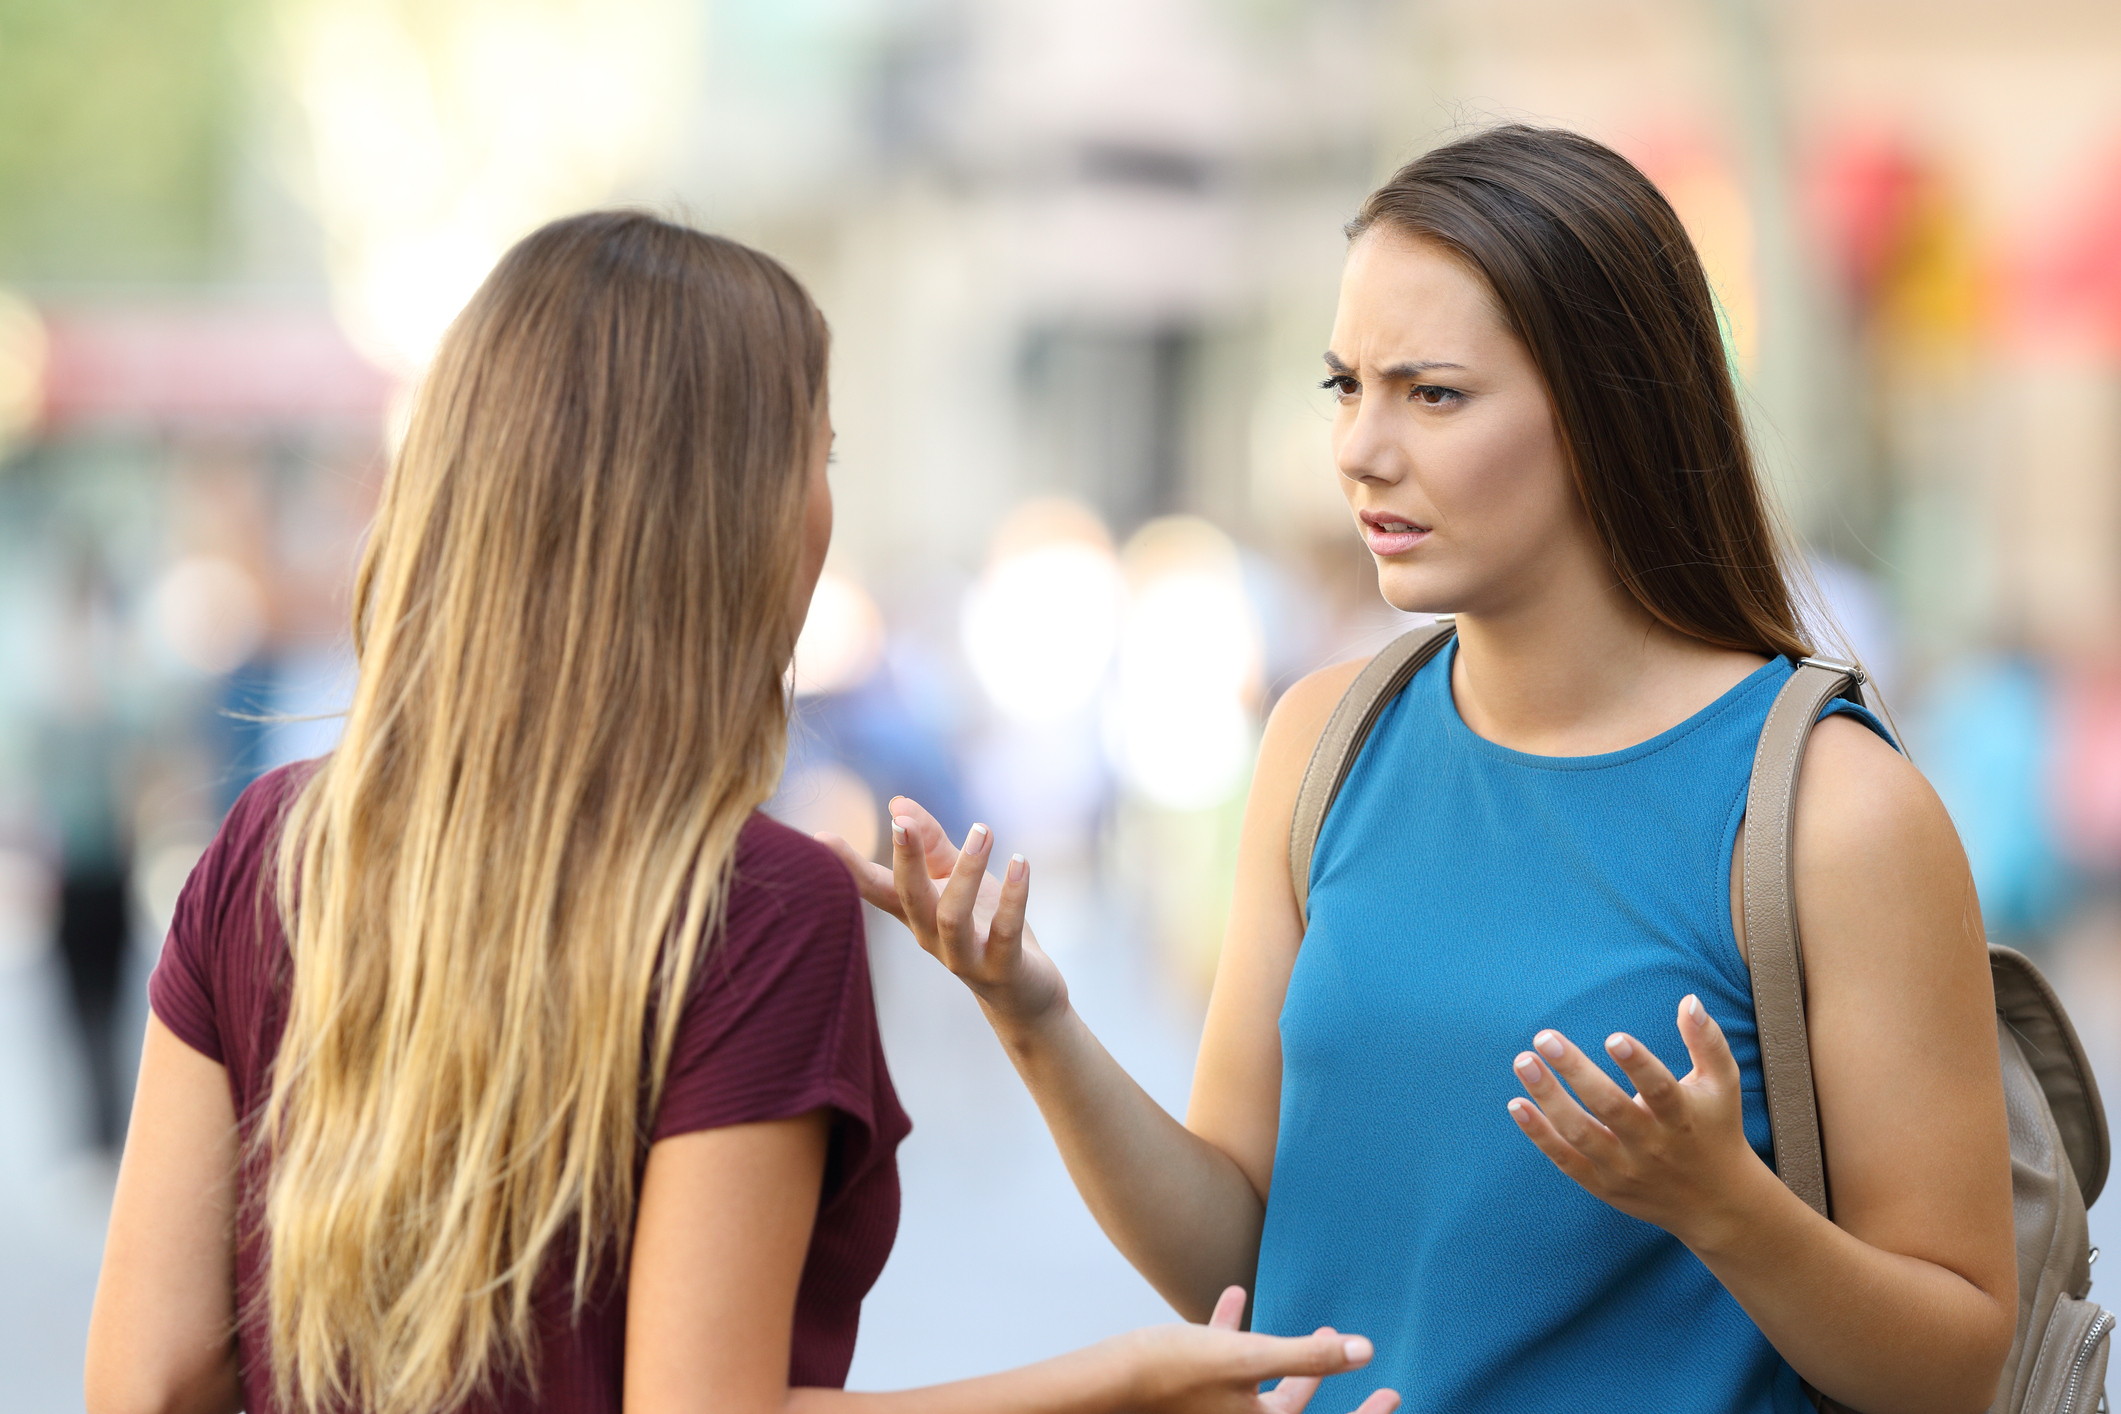 Image of Two women speaking to each other outdoors